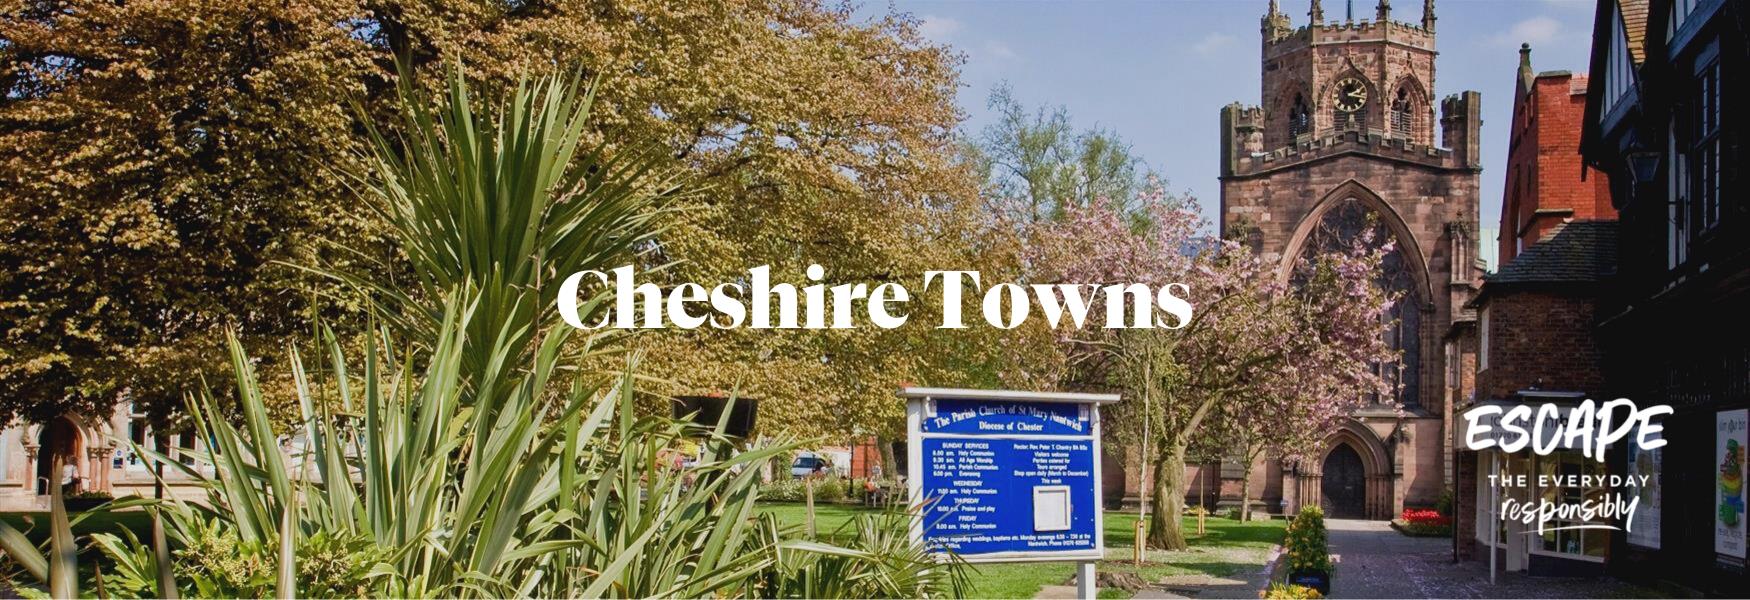 Cheshire Towns